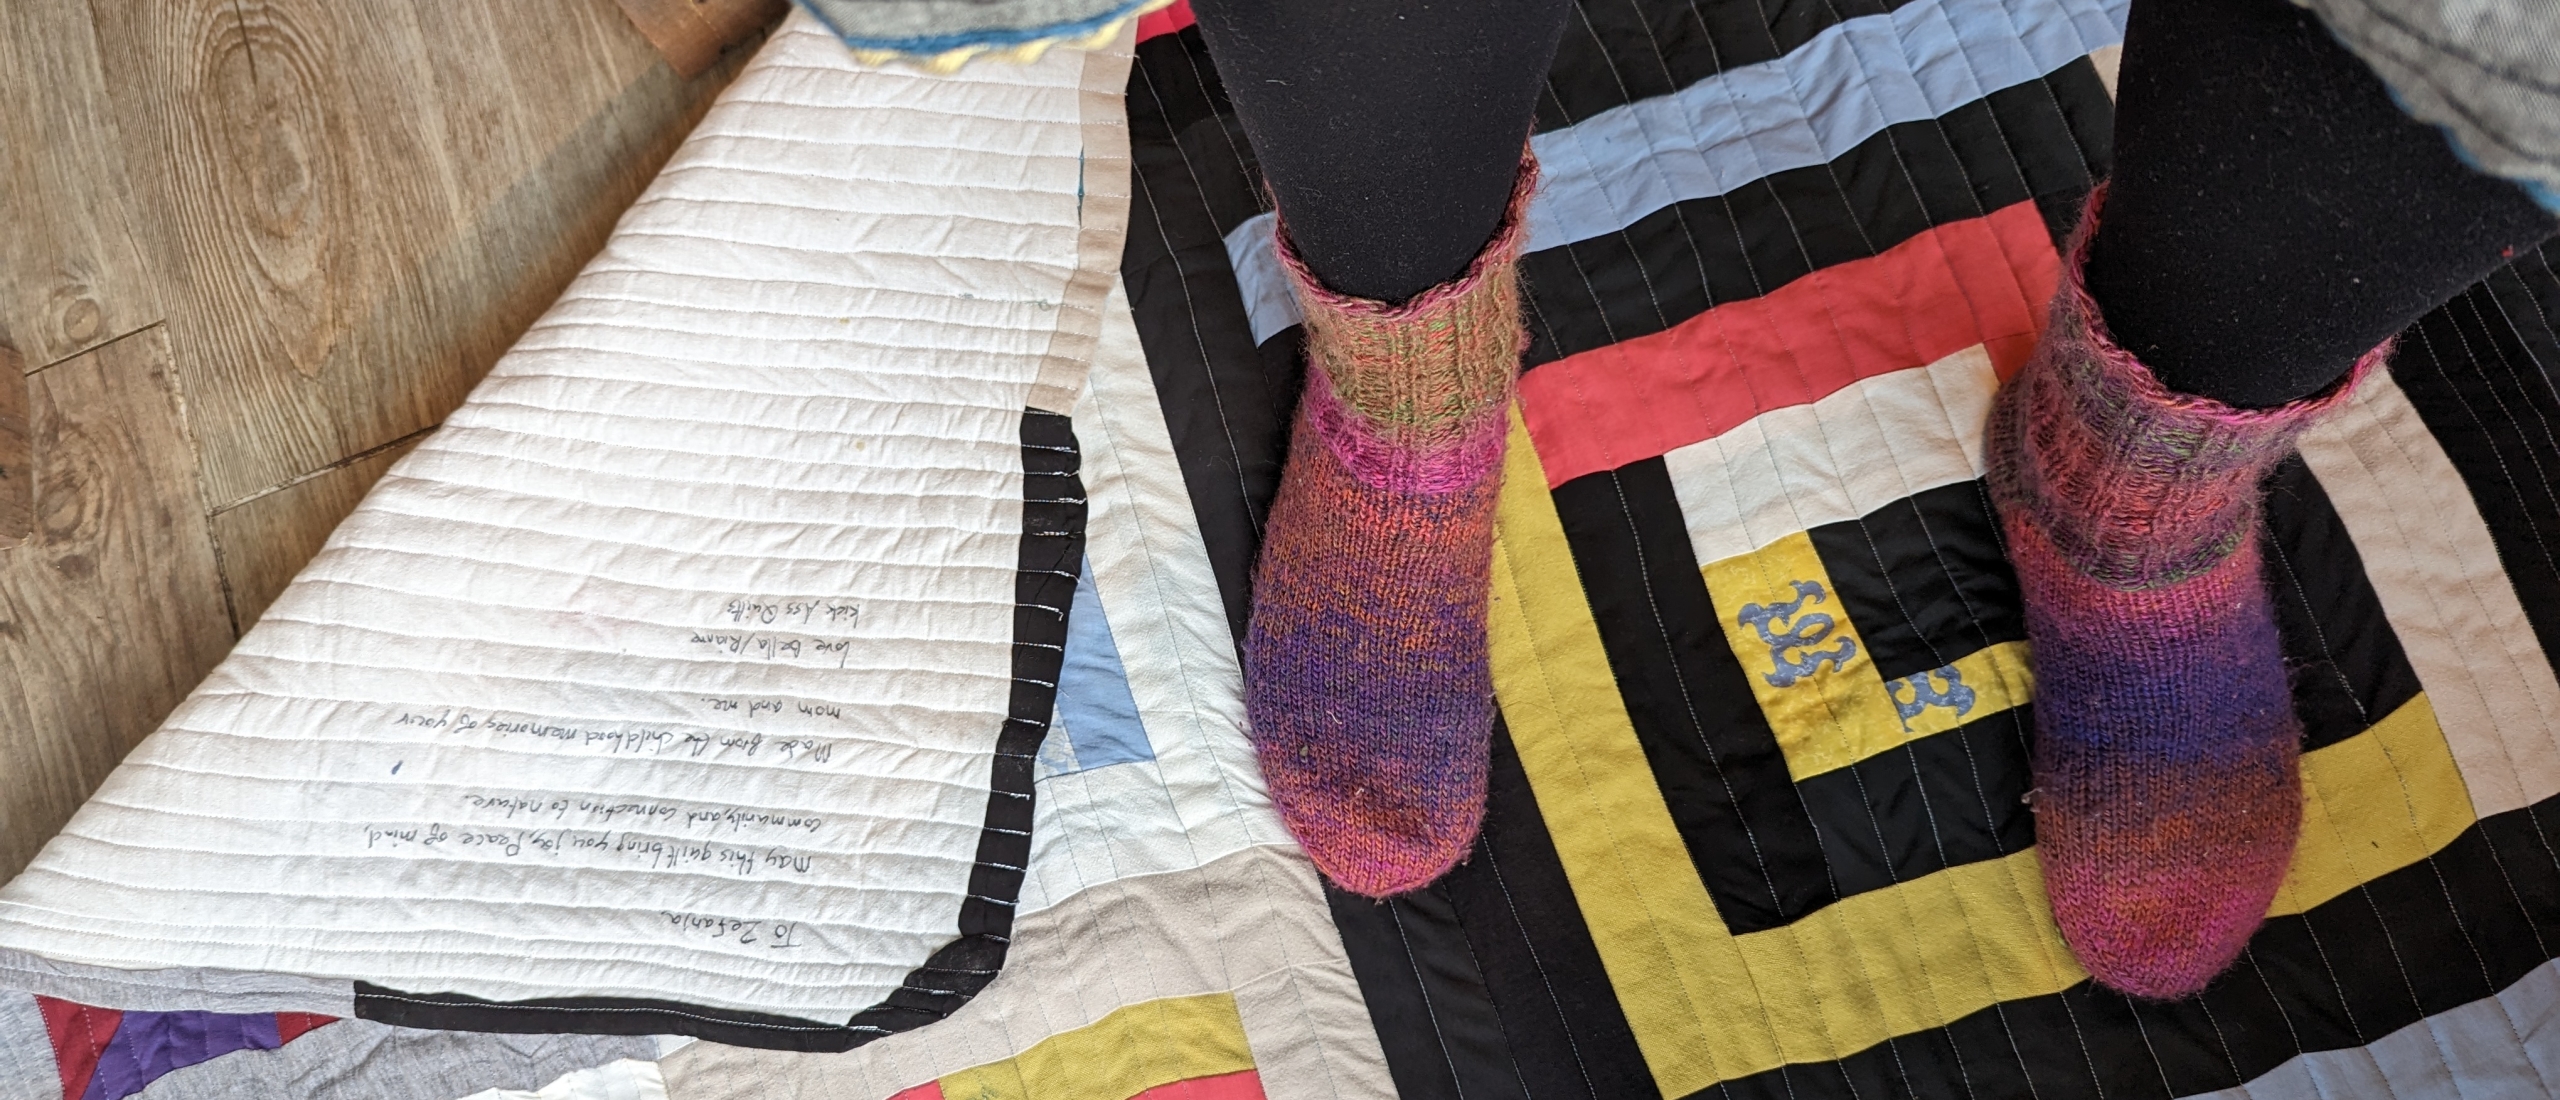 Redemption Quilt Photo with socks